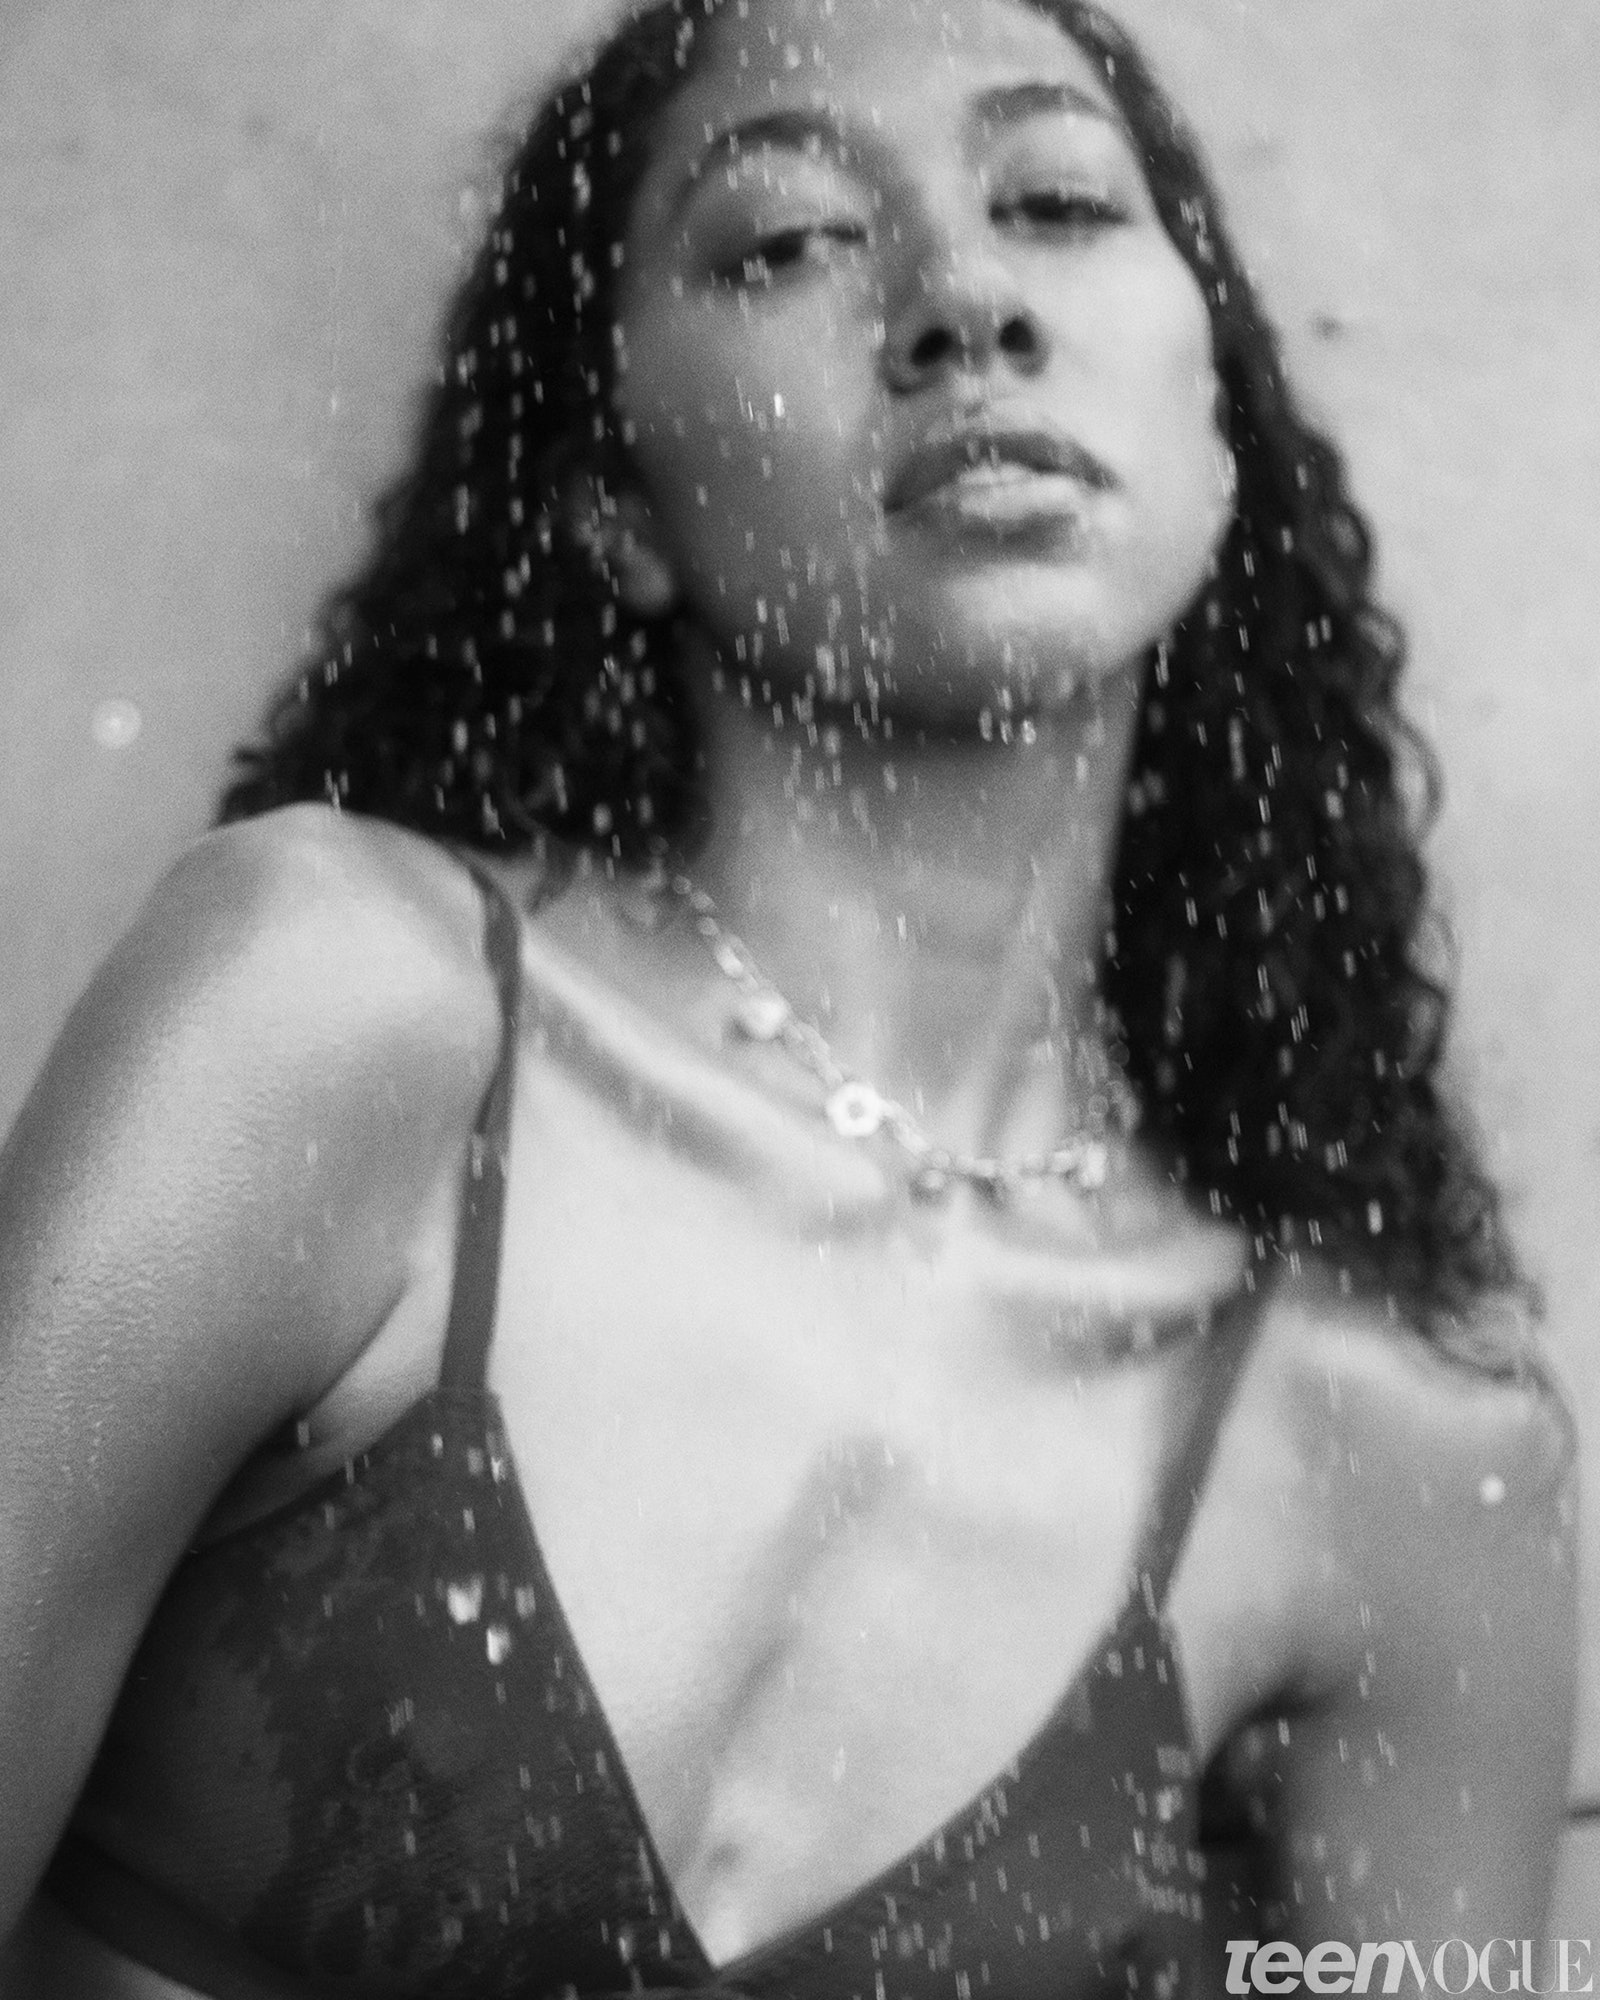 Aoki Lee Simmons standing underneath a shower head.